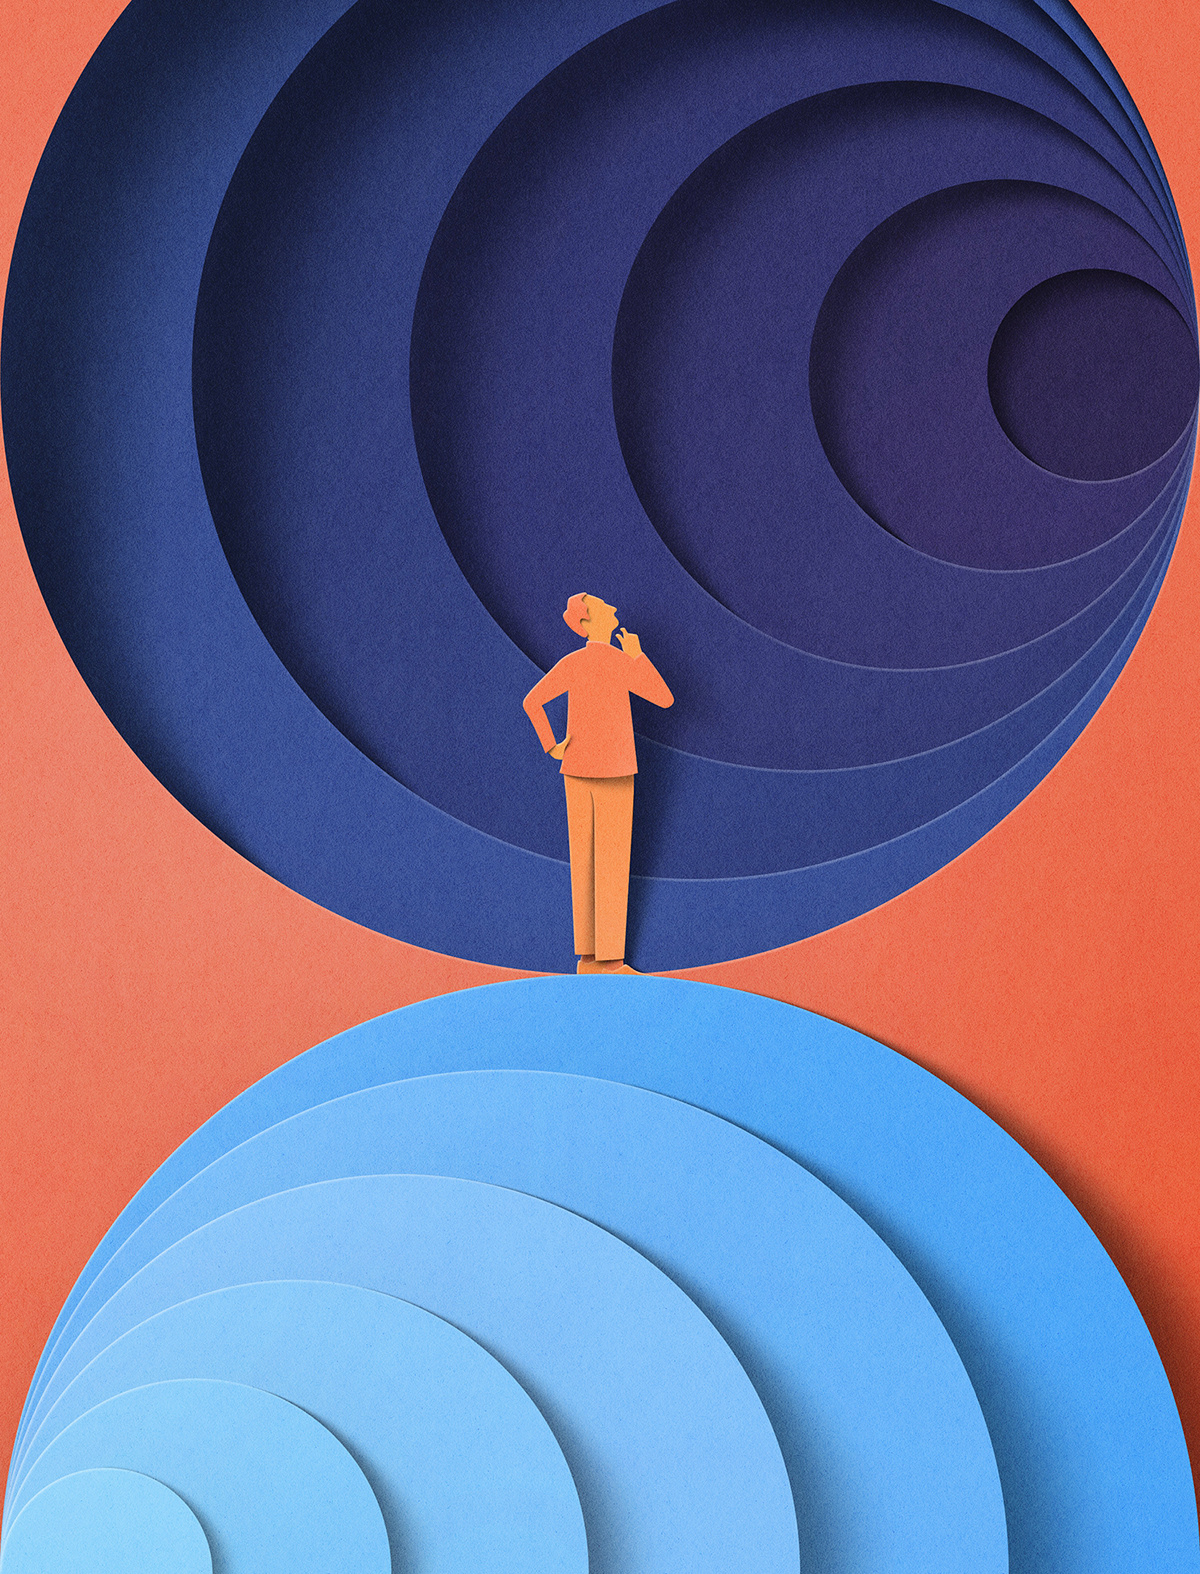 "The Secret Launguage of Reality". Inside illustration for The New Scientist - Editorial illustrations by Eiko Ojala